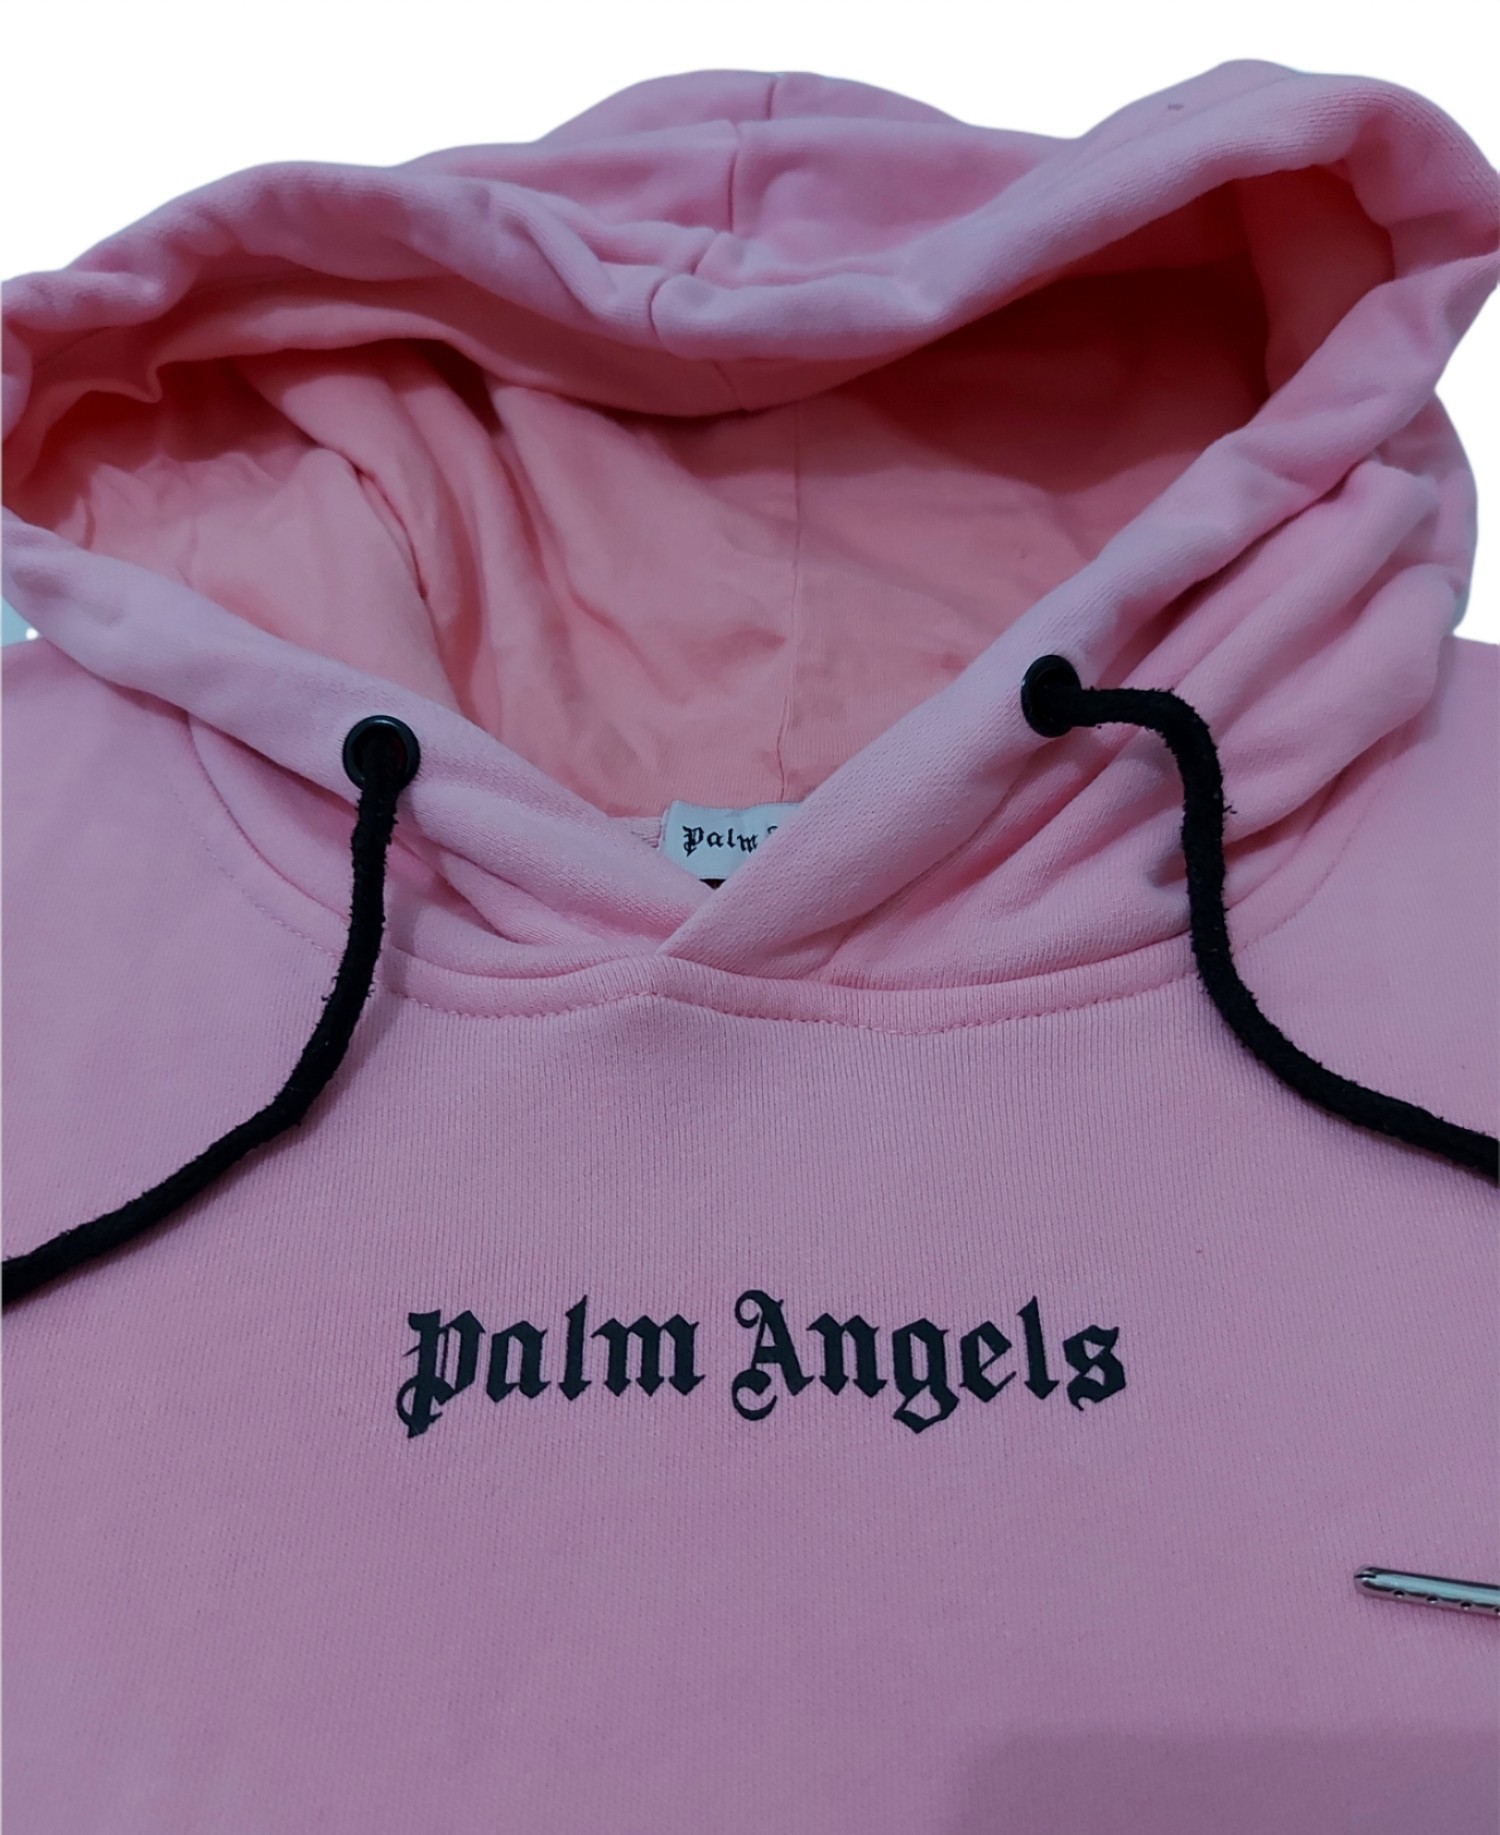 RARE! PALM ANGELS CLASSIC BIG SPELL OUT BACK HIT - 5